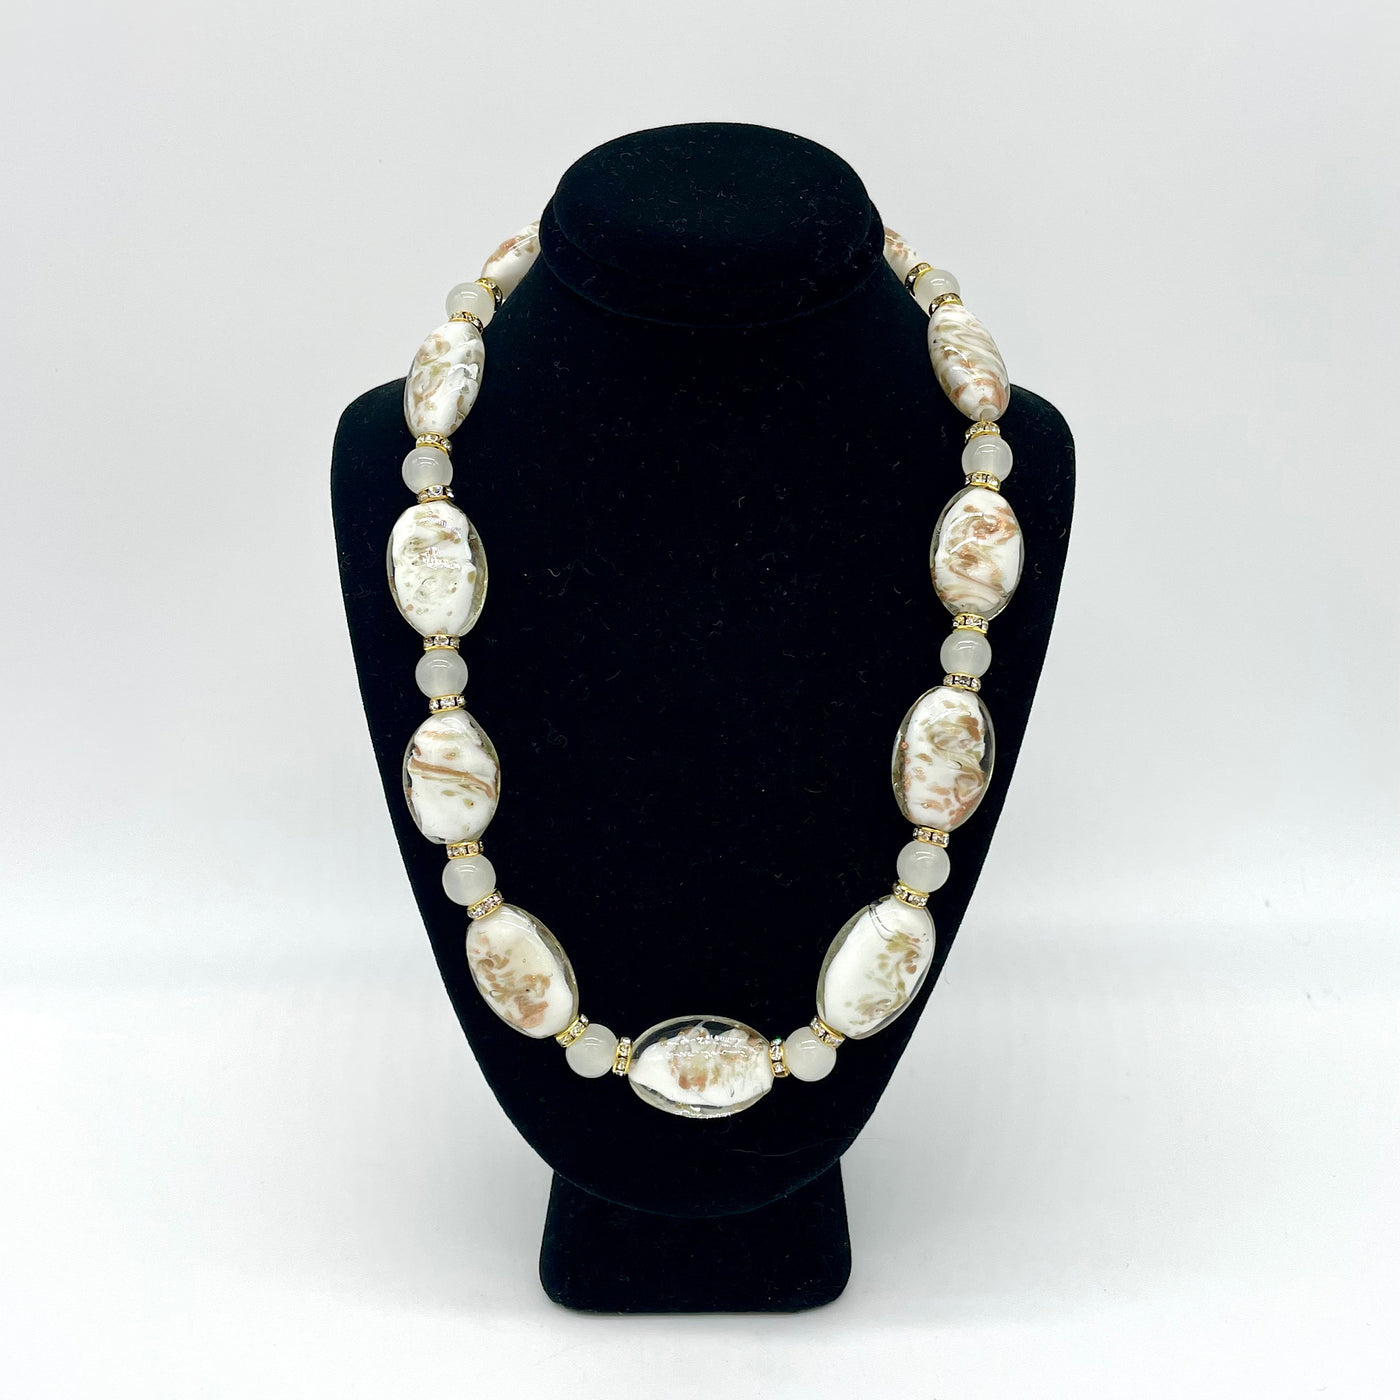 Handcrafted Gold and White Glass Bead Necklace